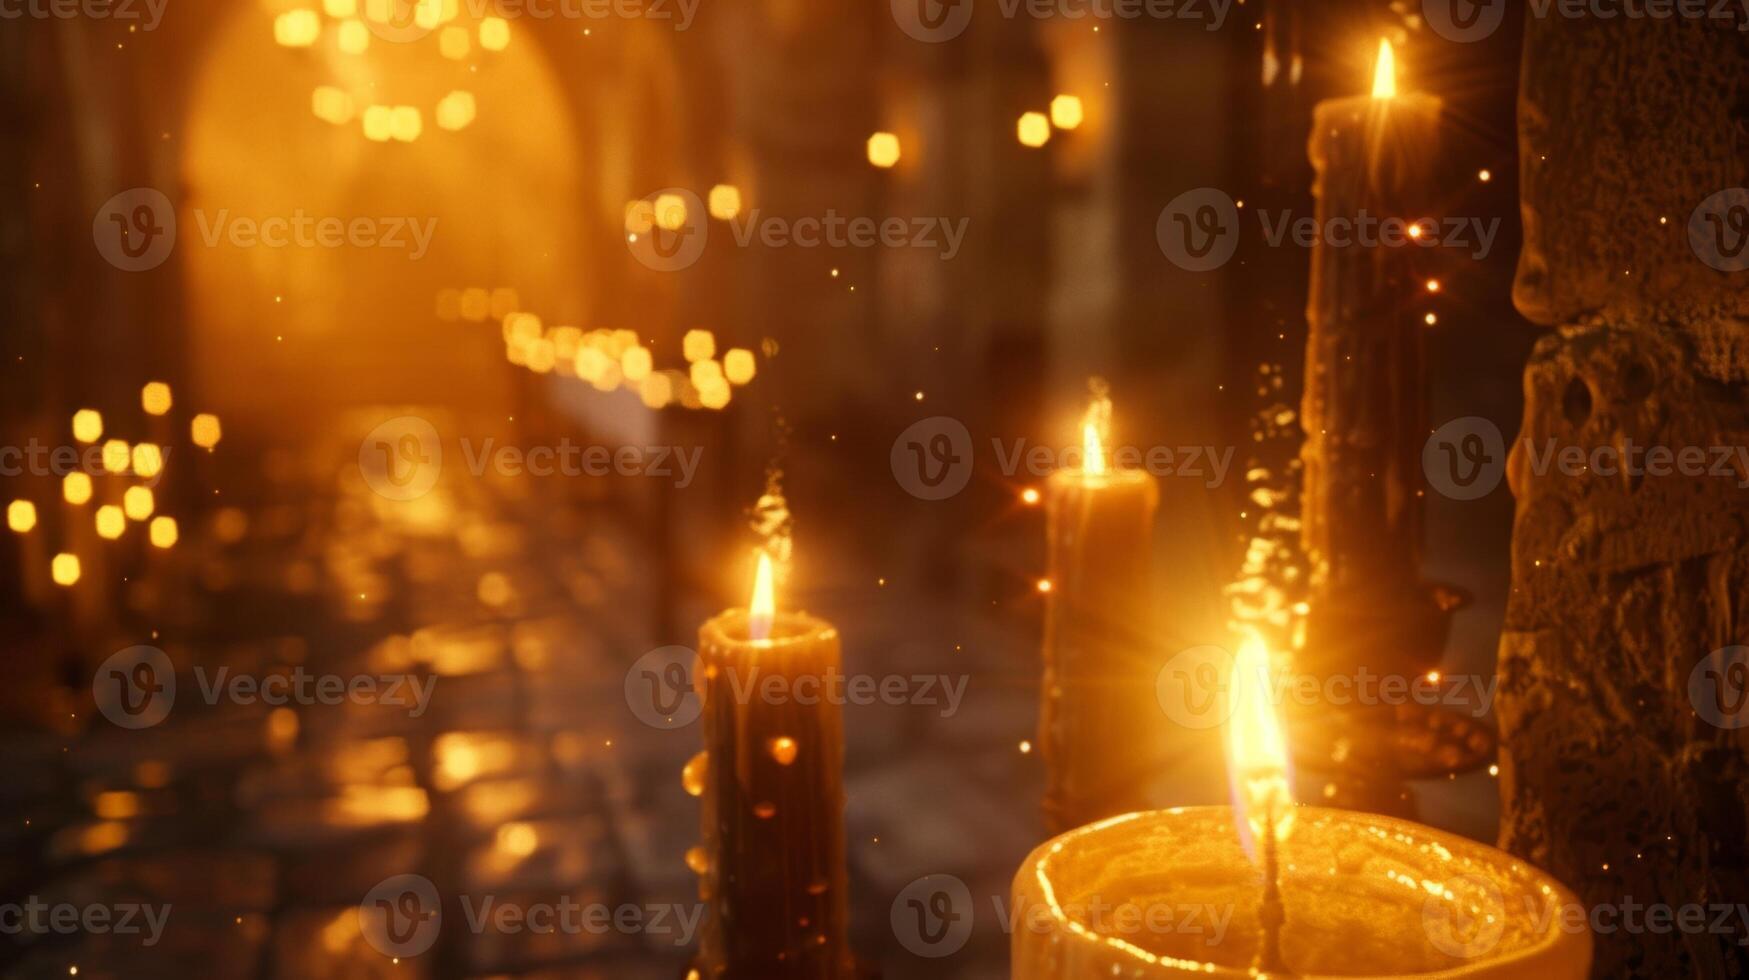 The warm glow of the candles dances off the walls giving an ethereal quality to the already magical scene. 2d flat cartoon photo